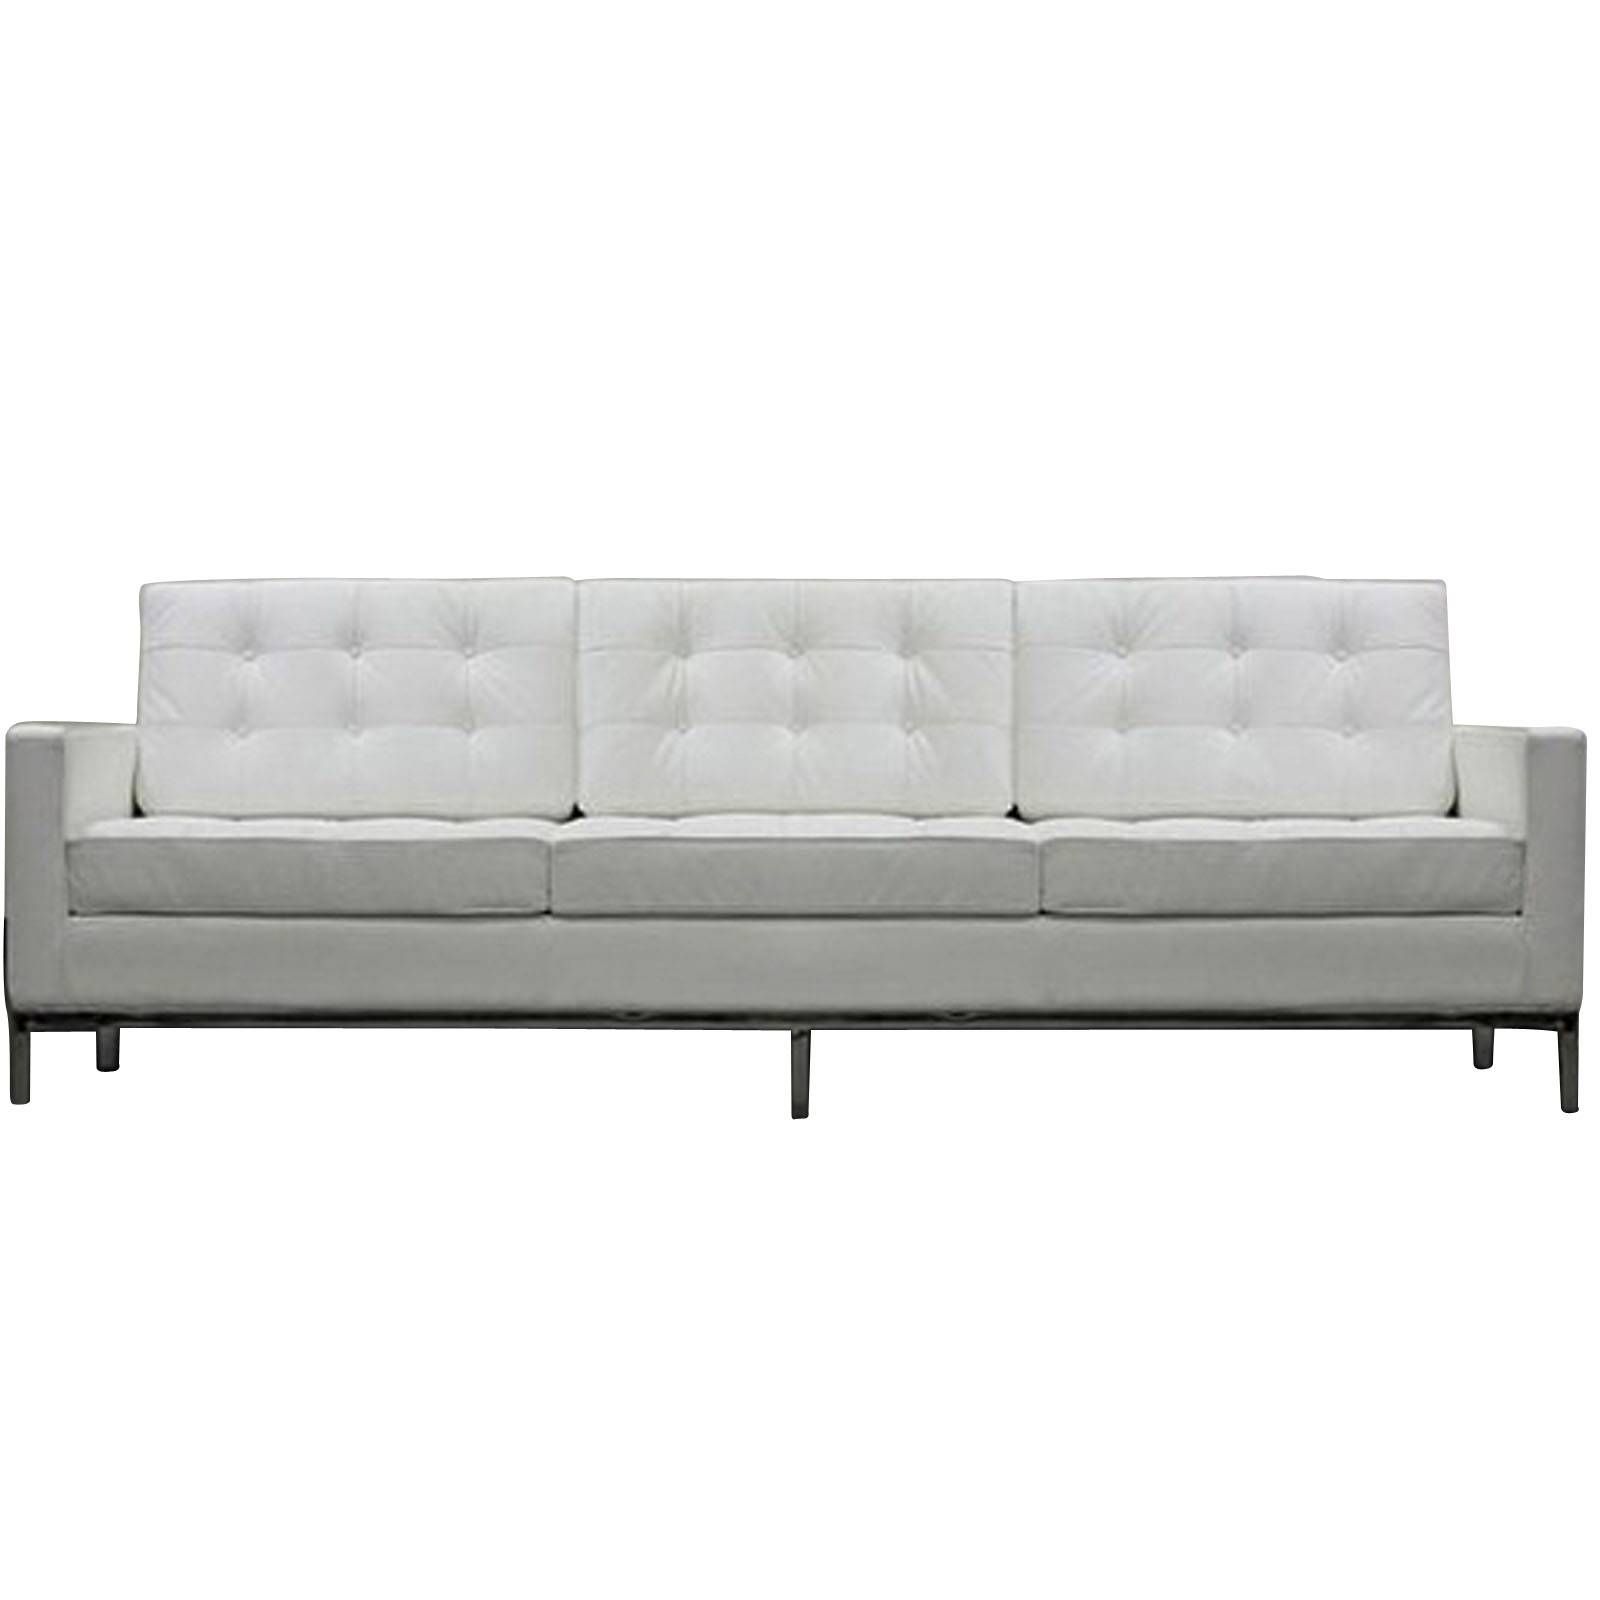 Florence Knoll Style Sofa Couch – Leather Throughout Florence Medium Sofas (View 8 of 25)